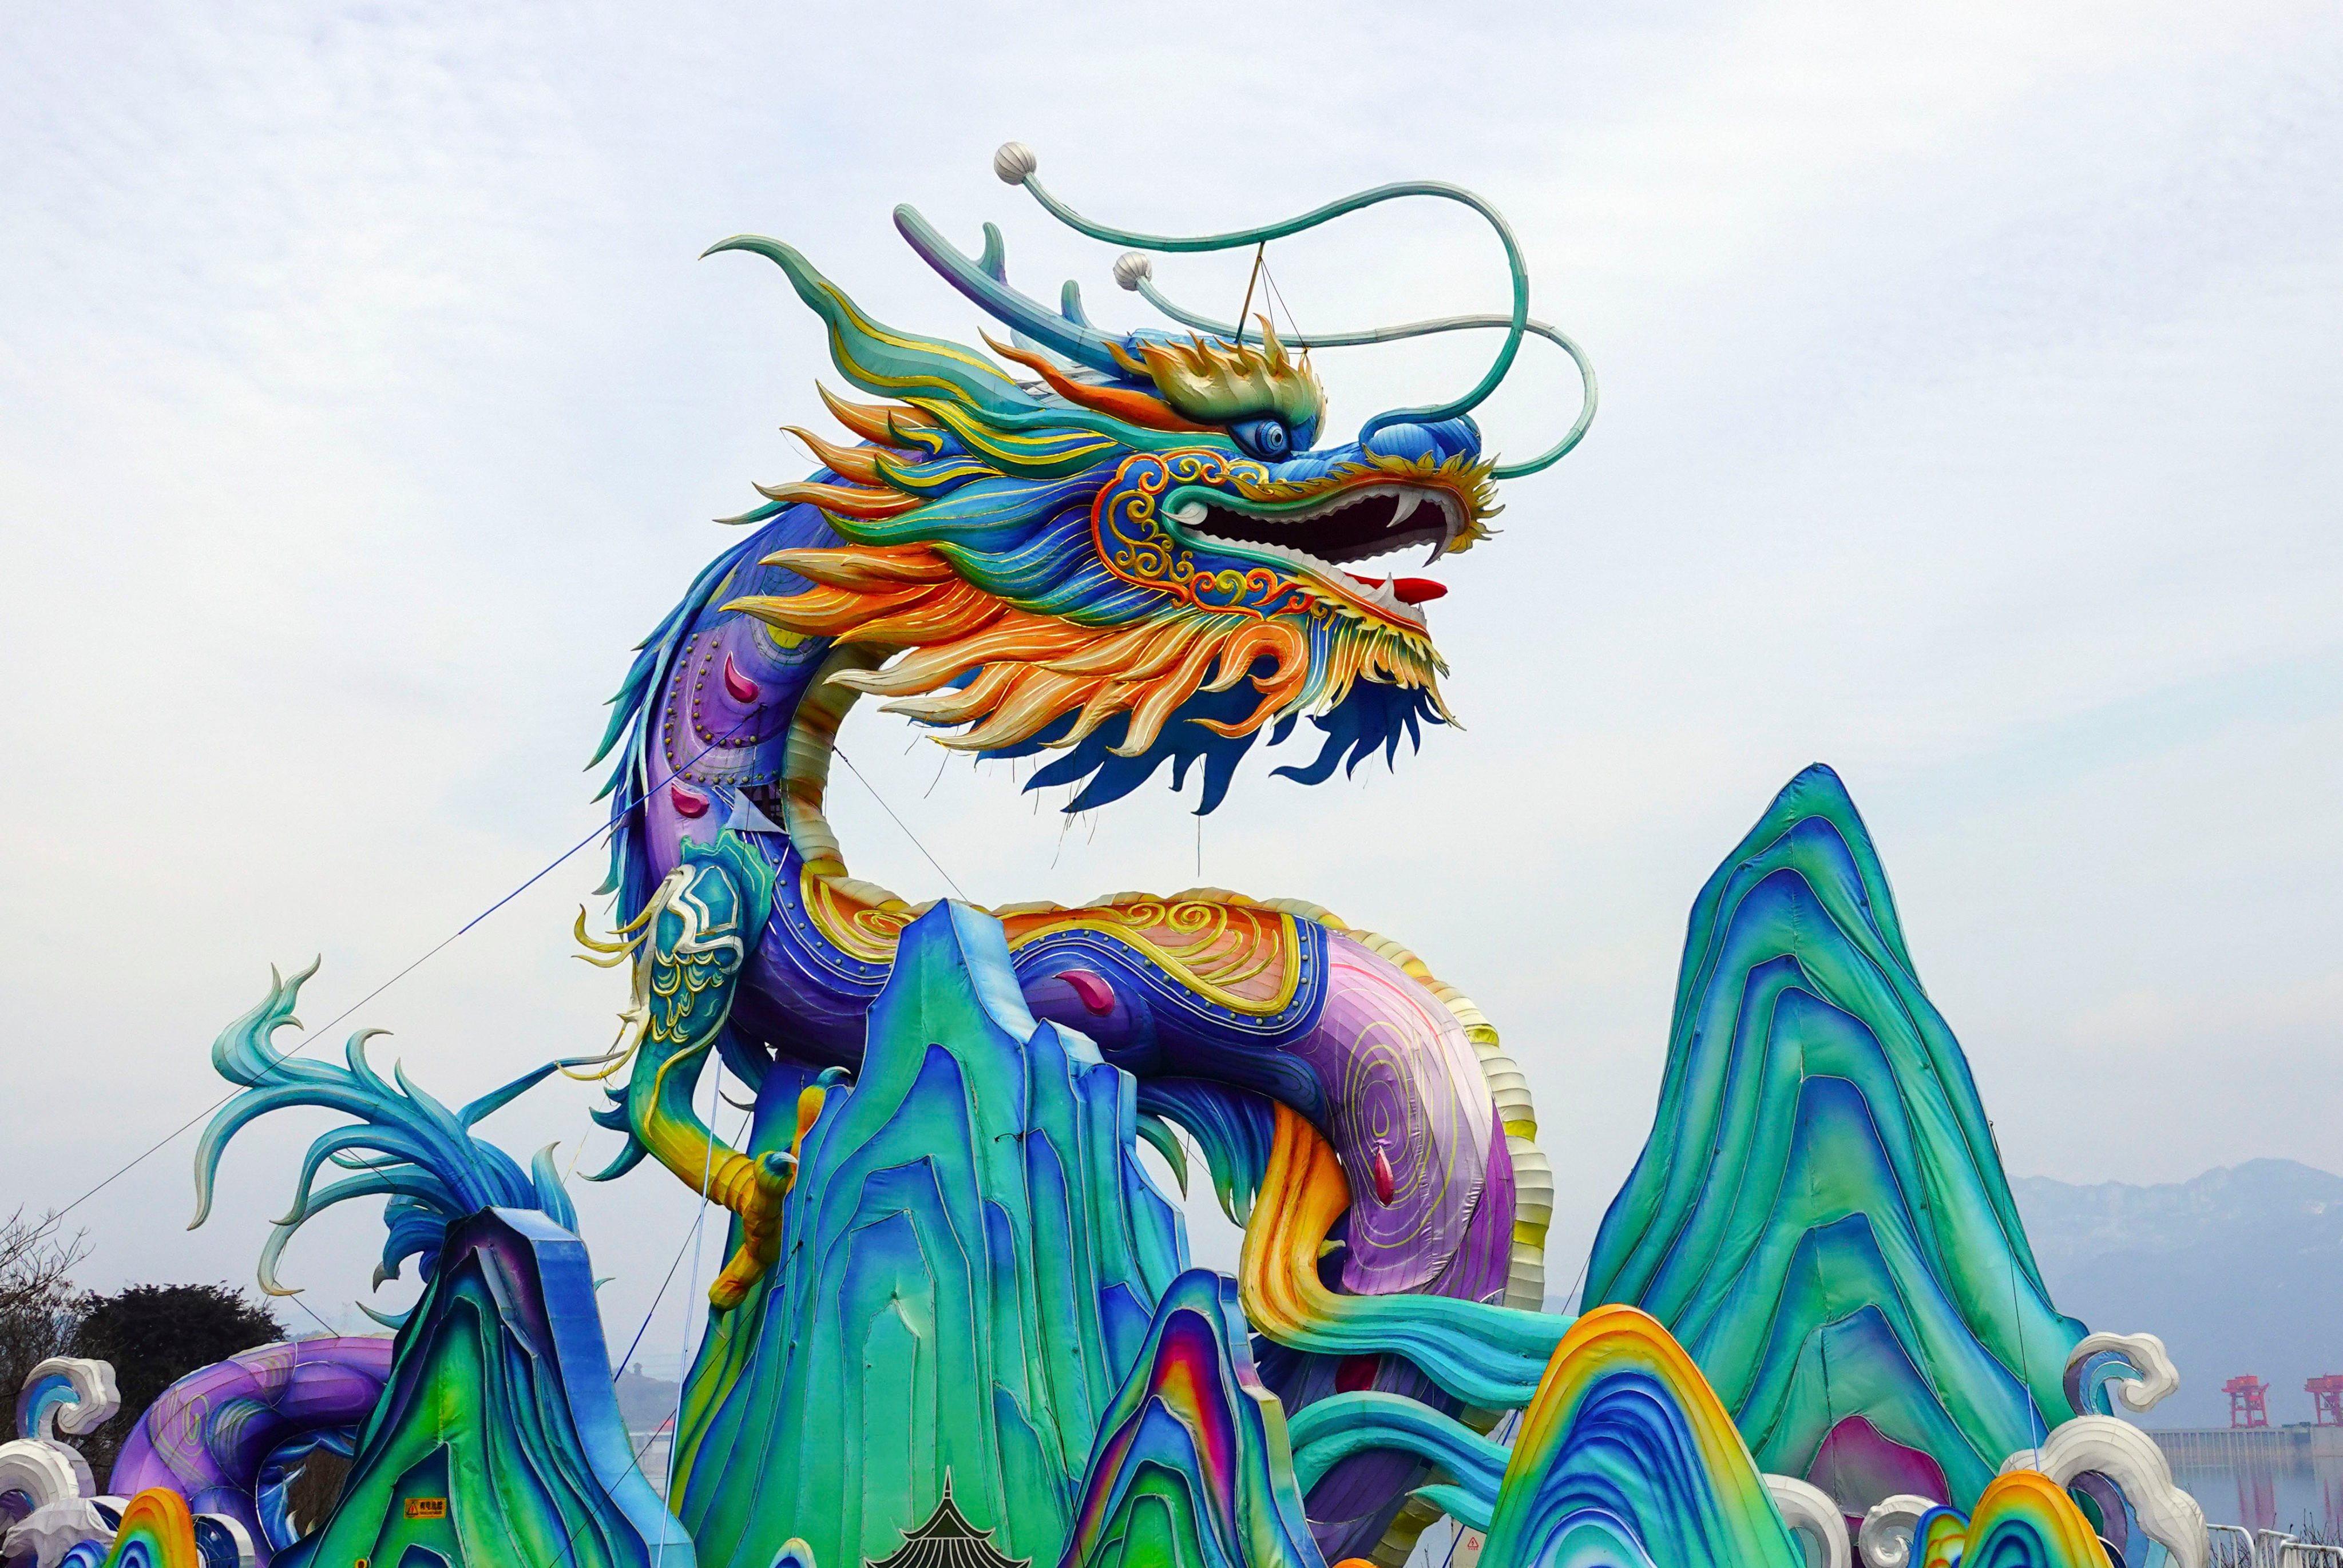 A dragon-shaped art installation in Yichang, Hubei Province, China. Photo: Getty Images